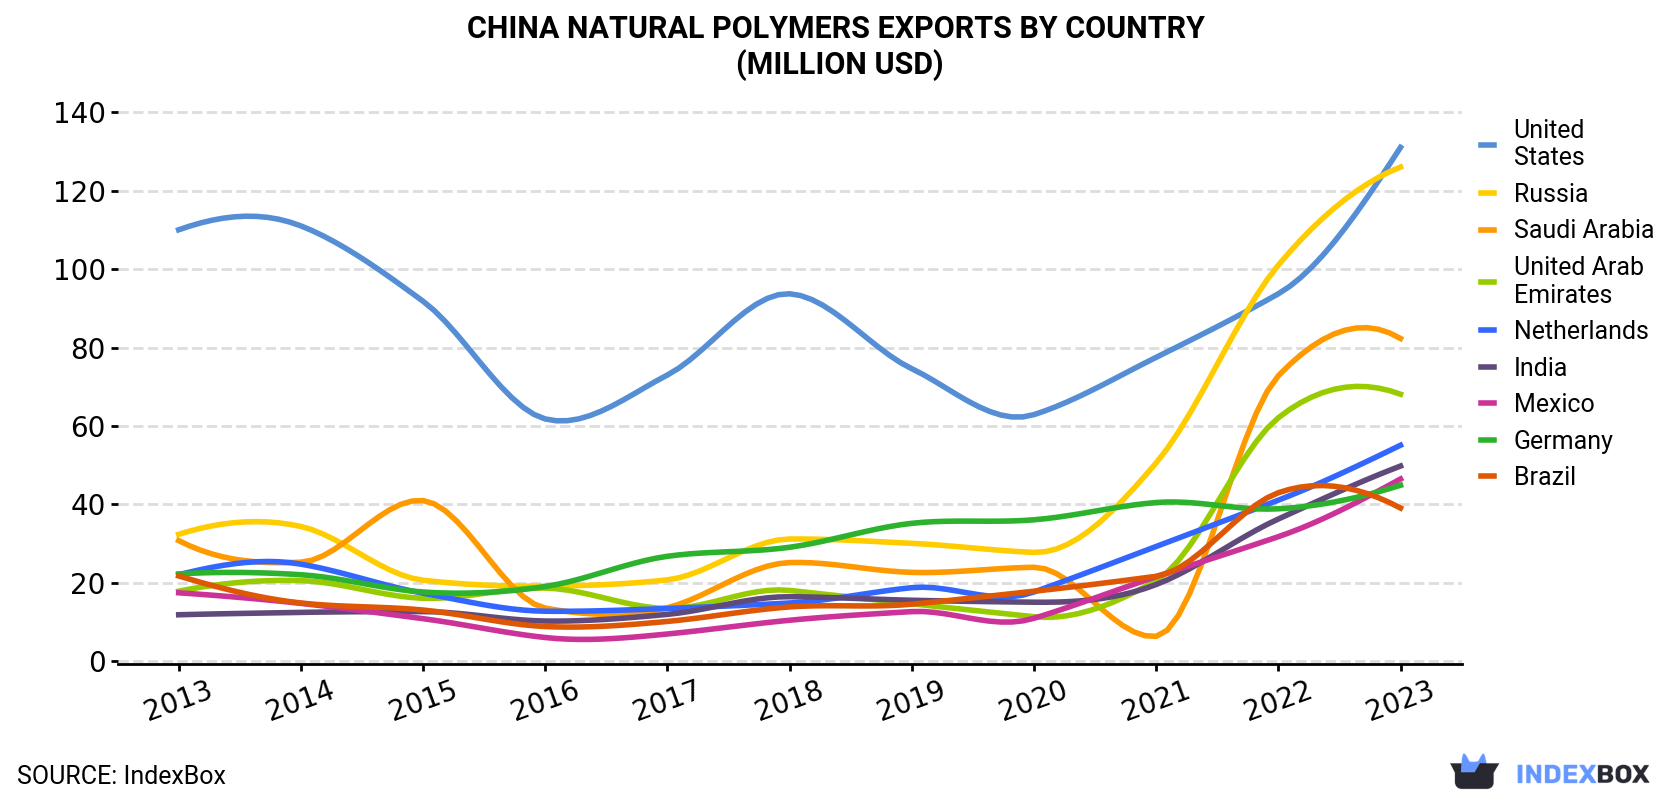 China Natural Polymers Exports By Country (Million USD)